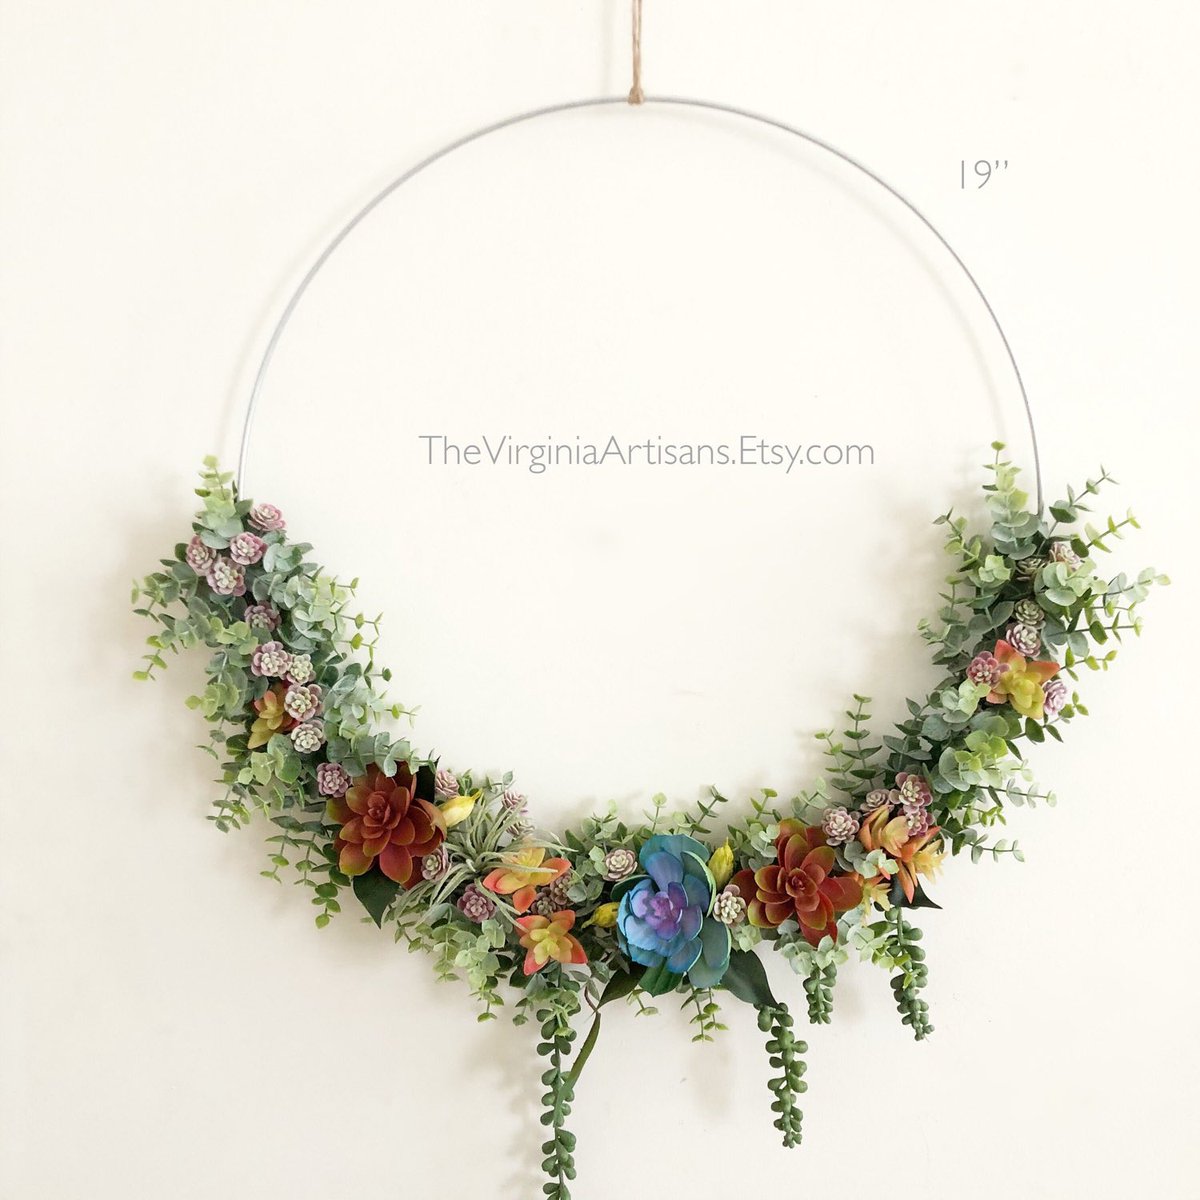 Excited to share this item from my #etsy shop: 19' Colorful Succulent Wreath, Modern Hoop Wreath Hoop Wreath #housewarming #mothersday #farmhousewreath #lasercutwood #airplants #succulentwreath #wreathsucculents #greensucculents #modernhomedecor etsy.me/40XseP3